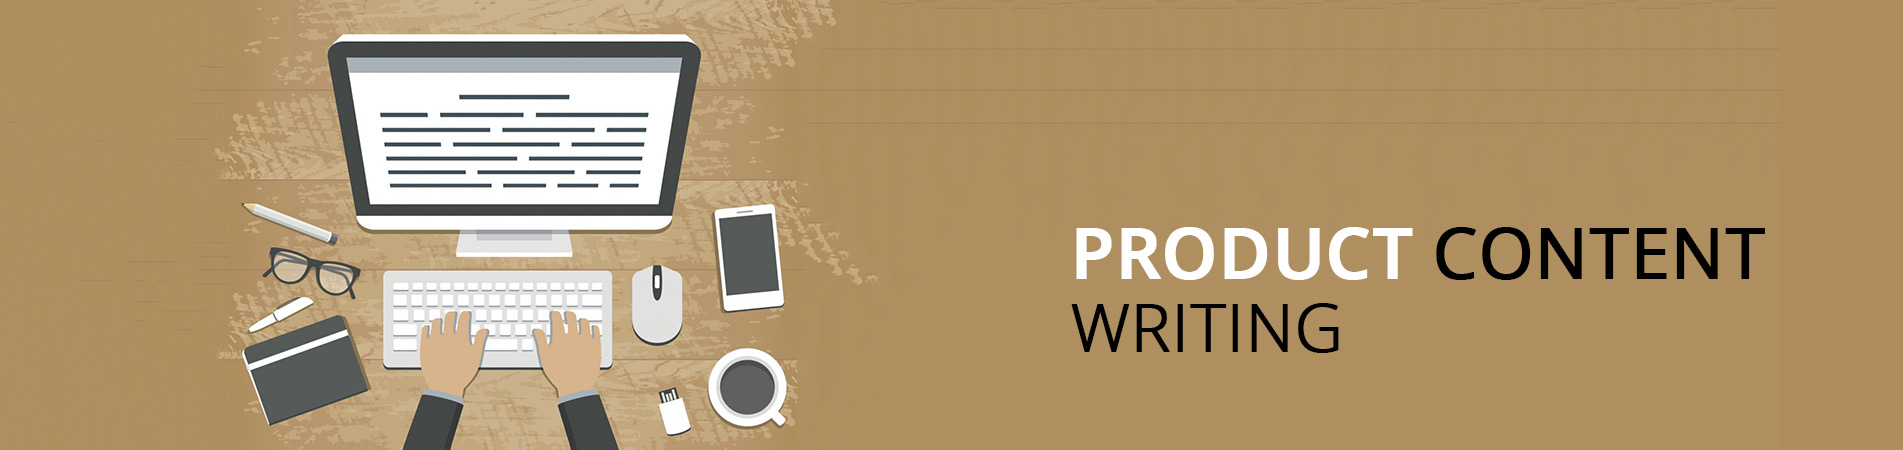 Product Content Writing Services Bangalore